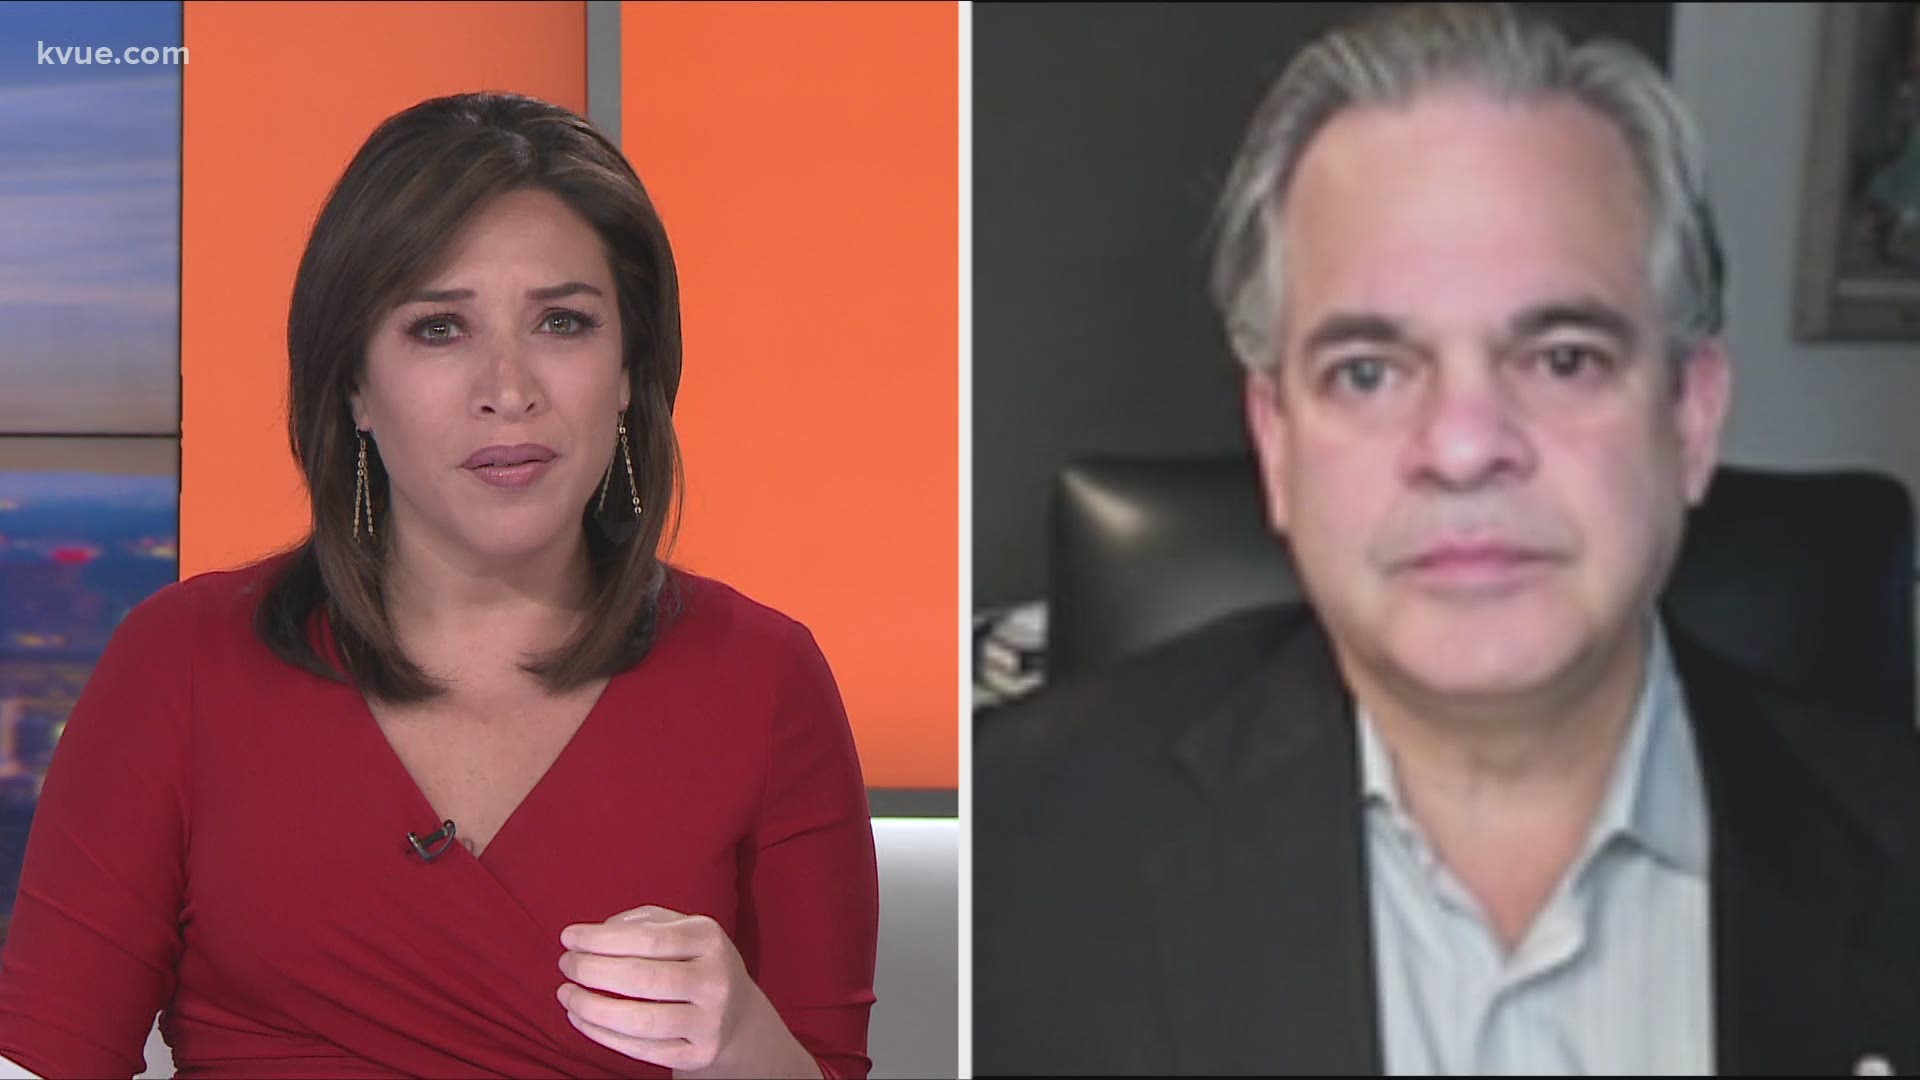 Mayor Steve Adler joined KVUE Daybreak on July 20 to talk about the latest COVID-19 trends, including schools reopening.